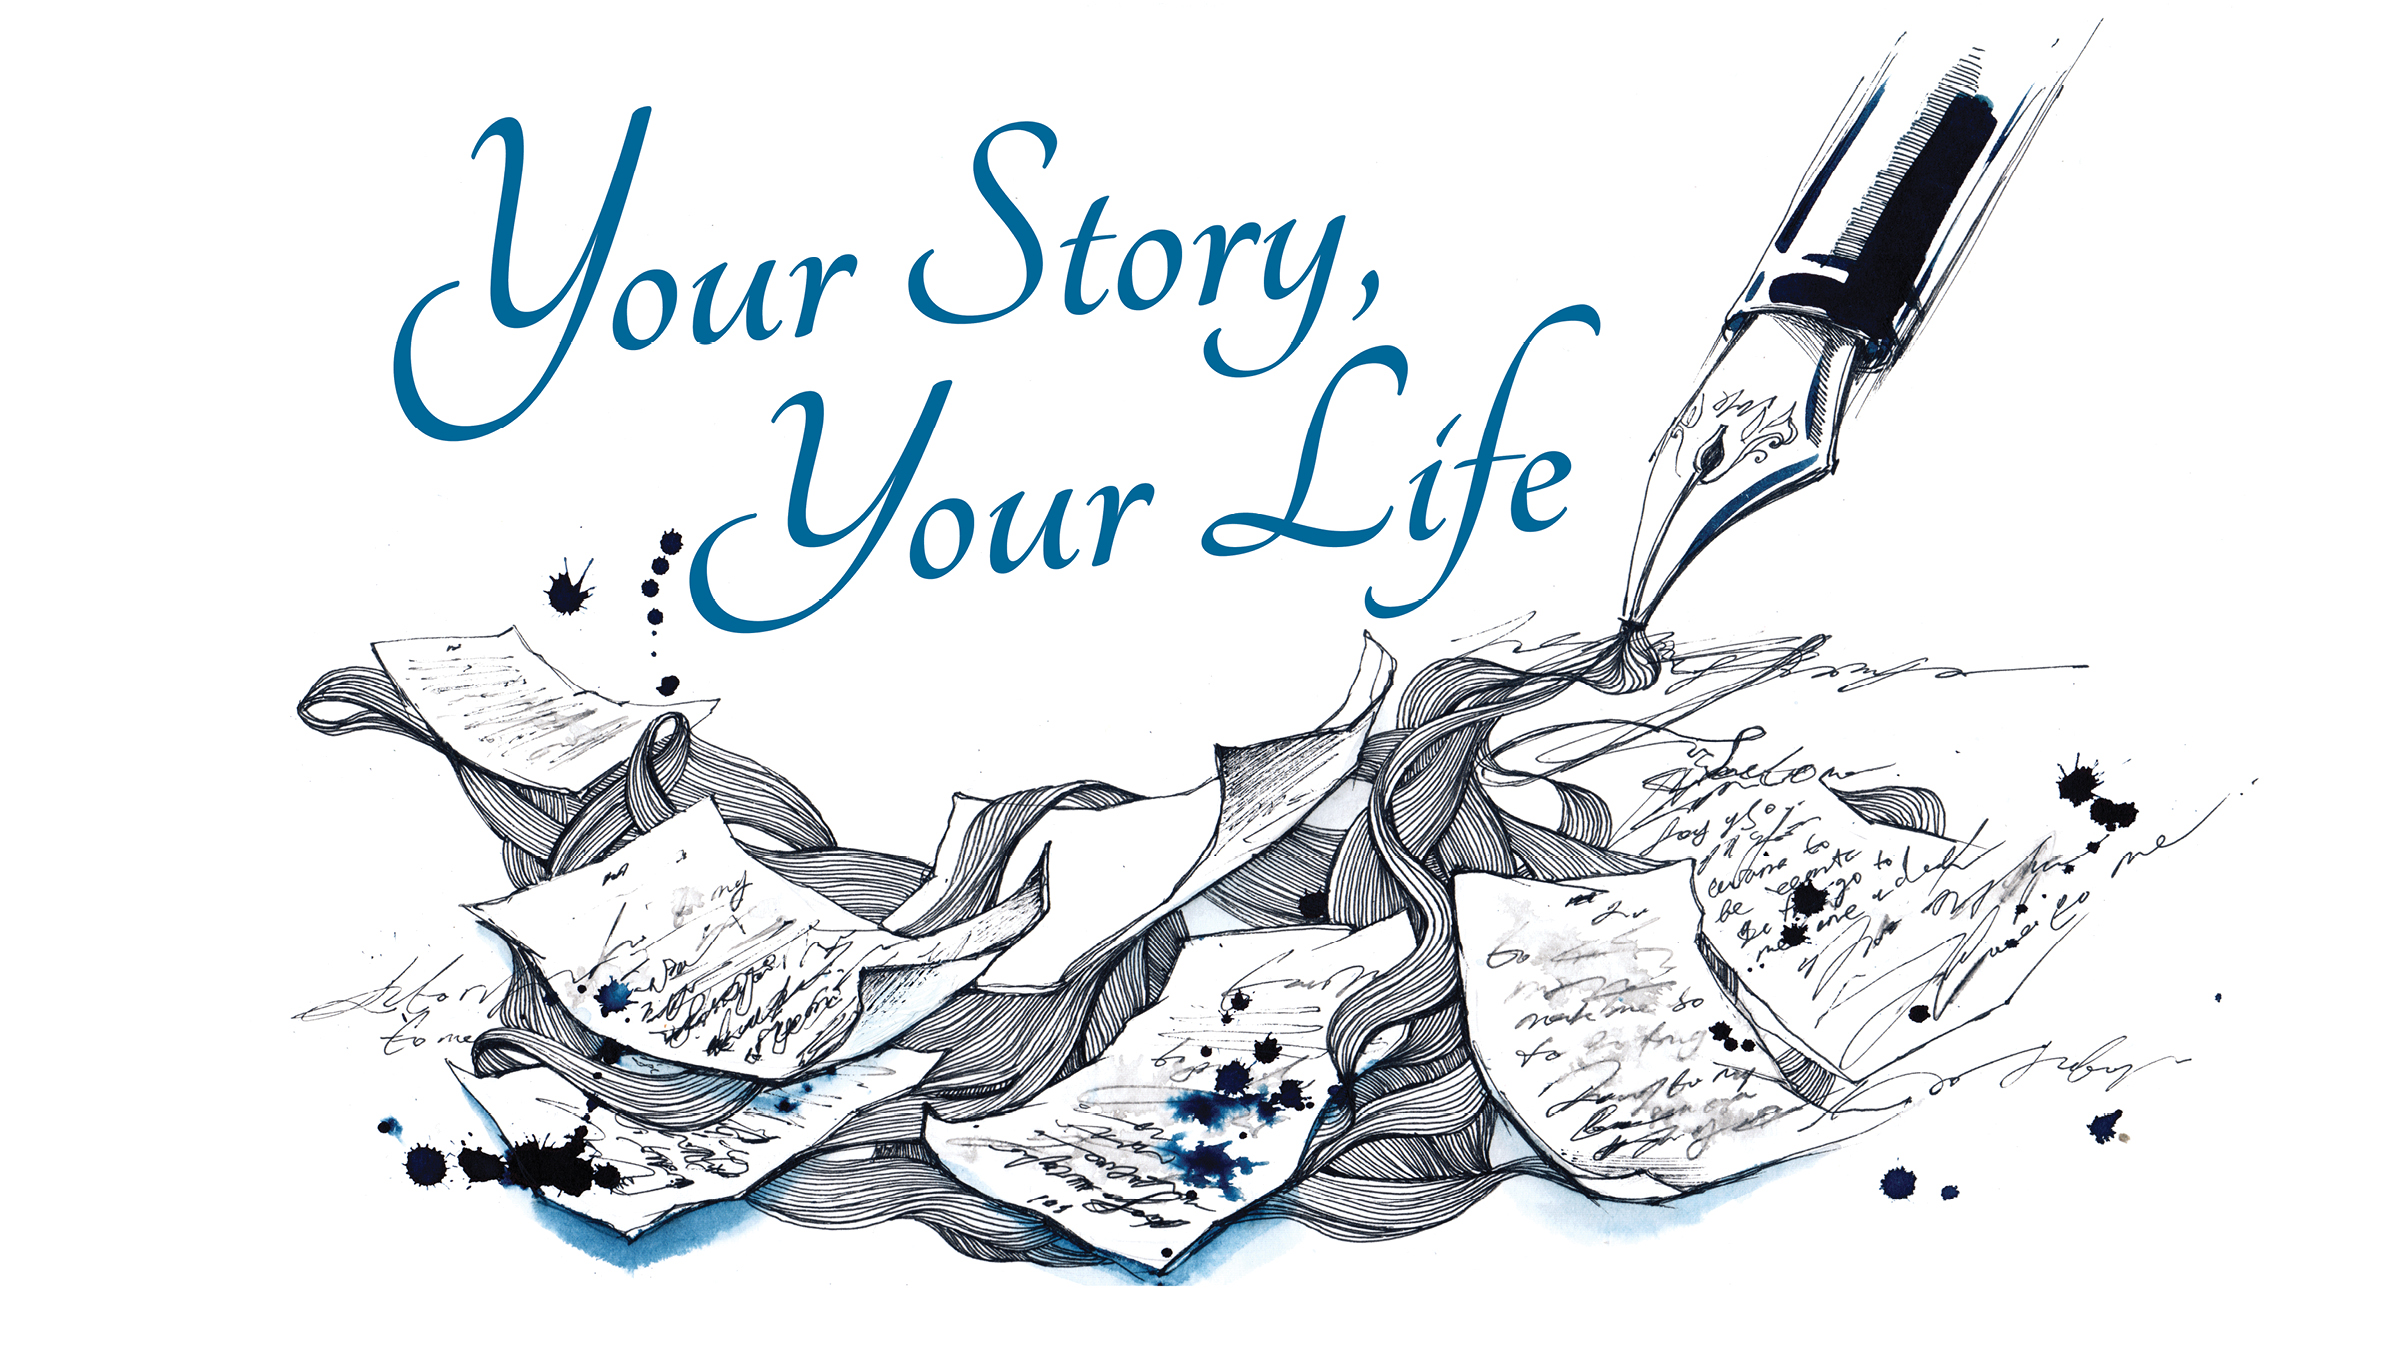 Your Story, Your Life